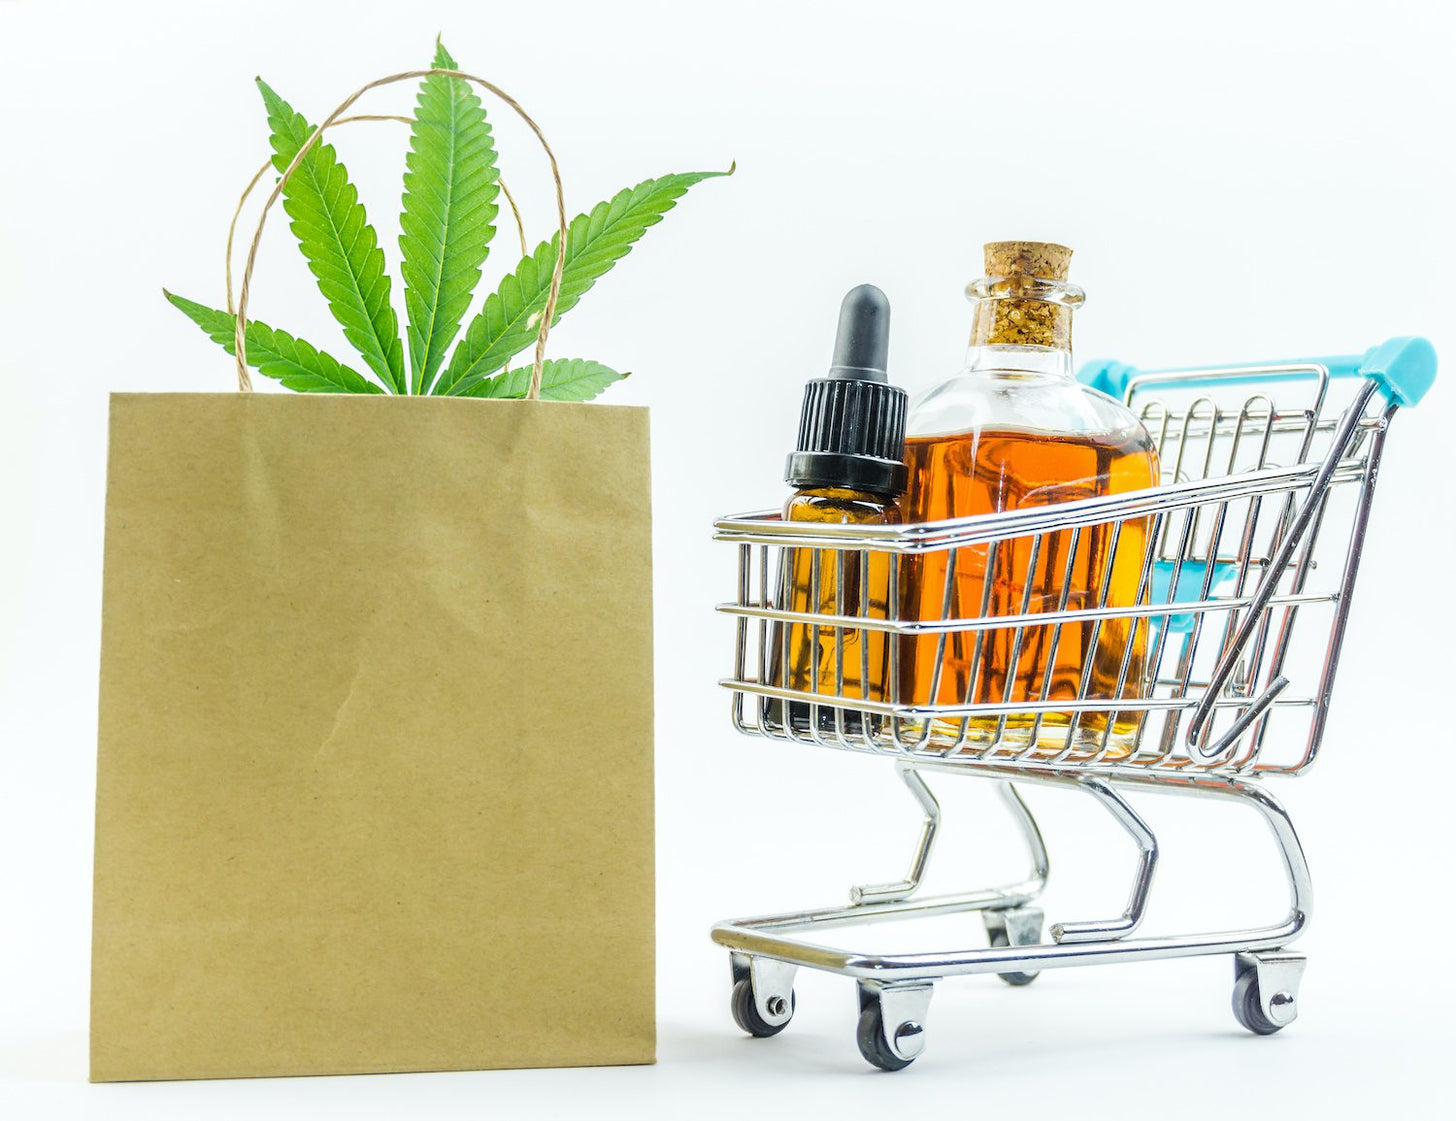 A tiny shopping cart with CBD oil bottles in it, next to a paper shopping bag with a hemp leaf poking out the top